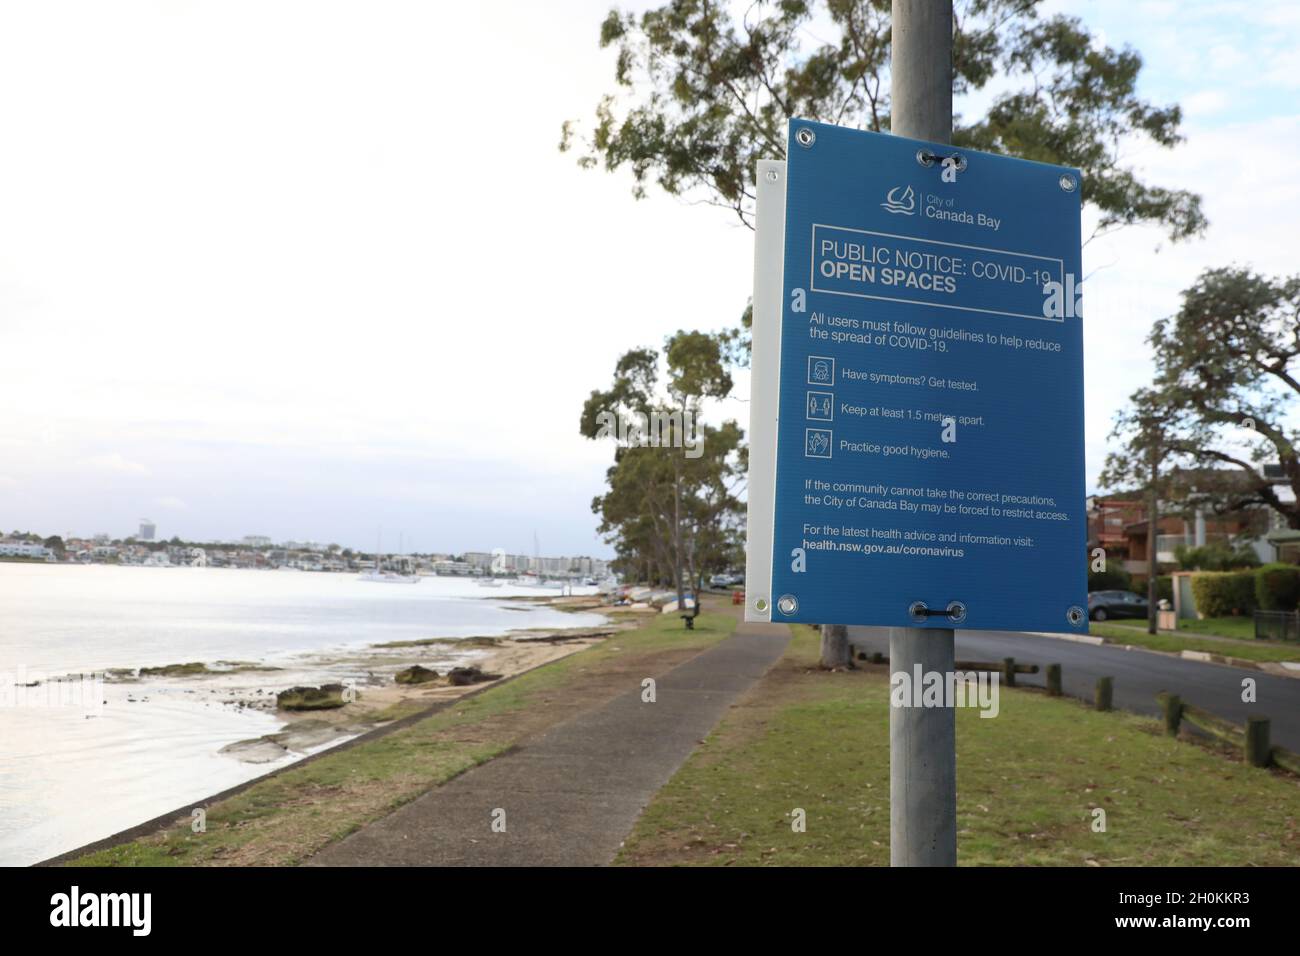 Sydney, Australia. 13th October 2021. Pictured: City of Canada Bay council Covid-19 sign next to the Parramatta River on Wymston Parade, Abbotsford. So called ‘freedom day’ was on 11th October as places in New South Wales open up only to the vaccinated and a system of segregation and apartheid is introduced. About 75% of the population who are fully vaccinated will be allowed inside various venues, but the other 25% who are not fully vaccinated with two doses are kept out. Credit: Richard Milnes/Alamy Live News Stock Photo